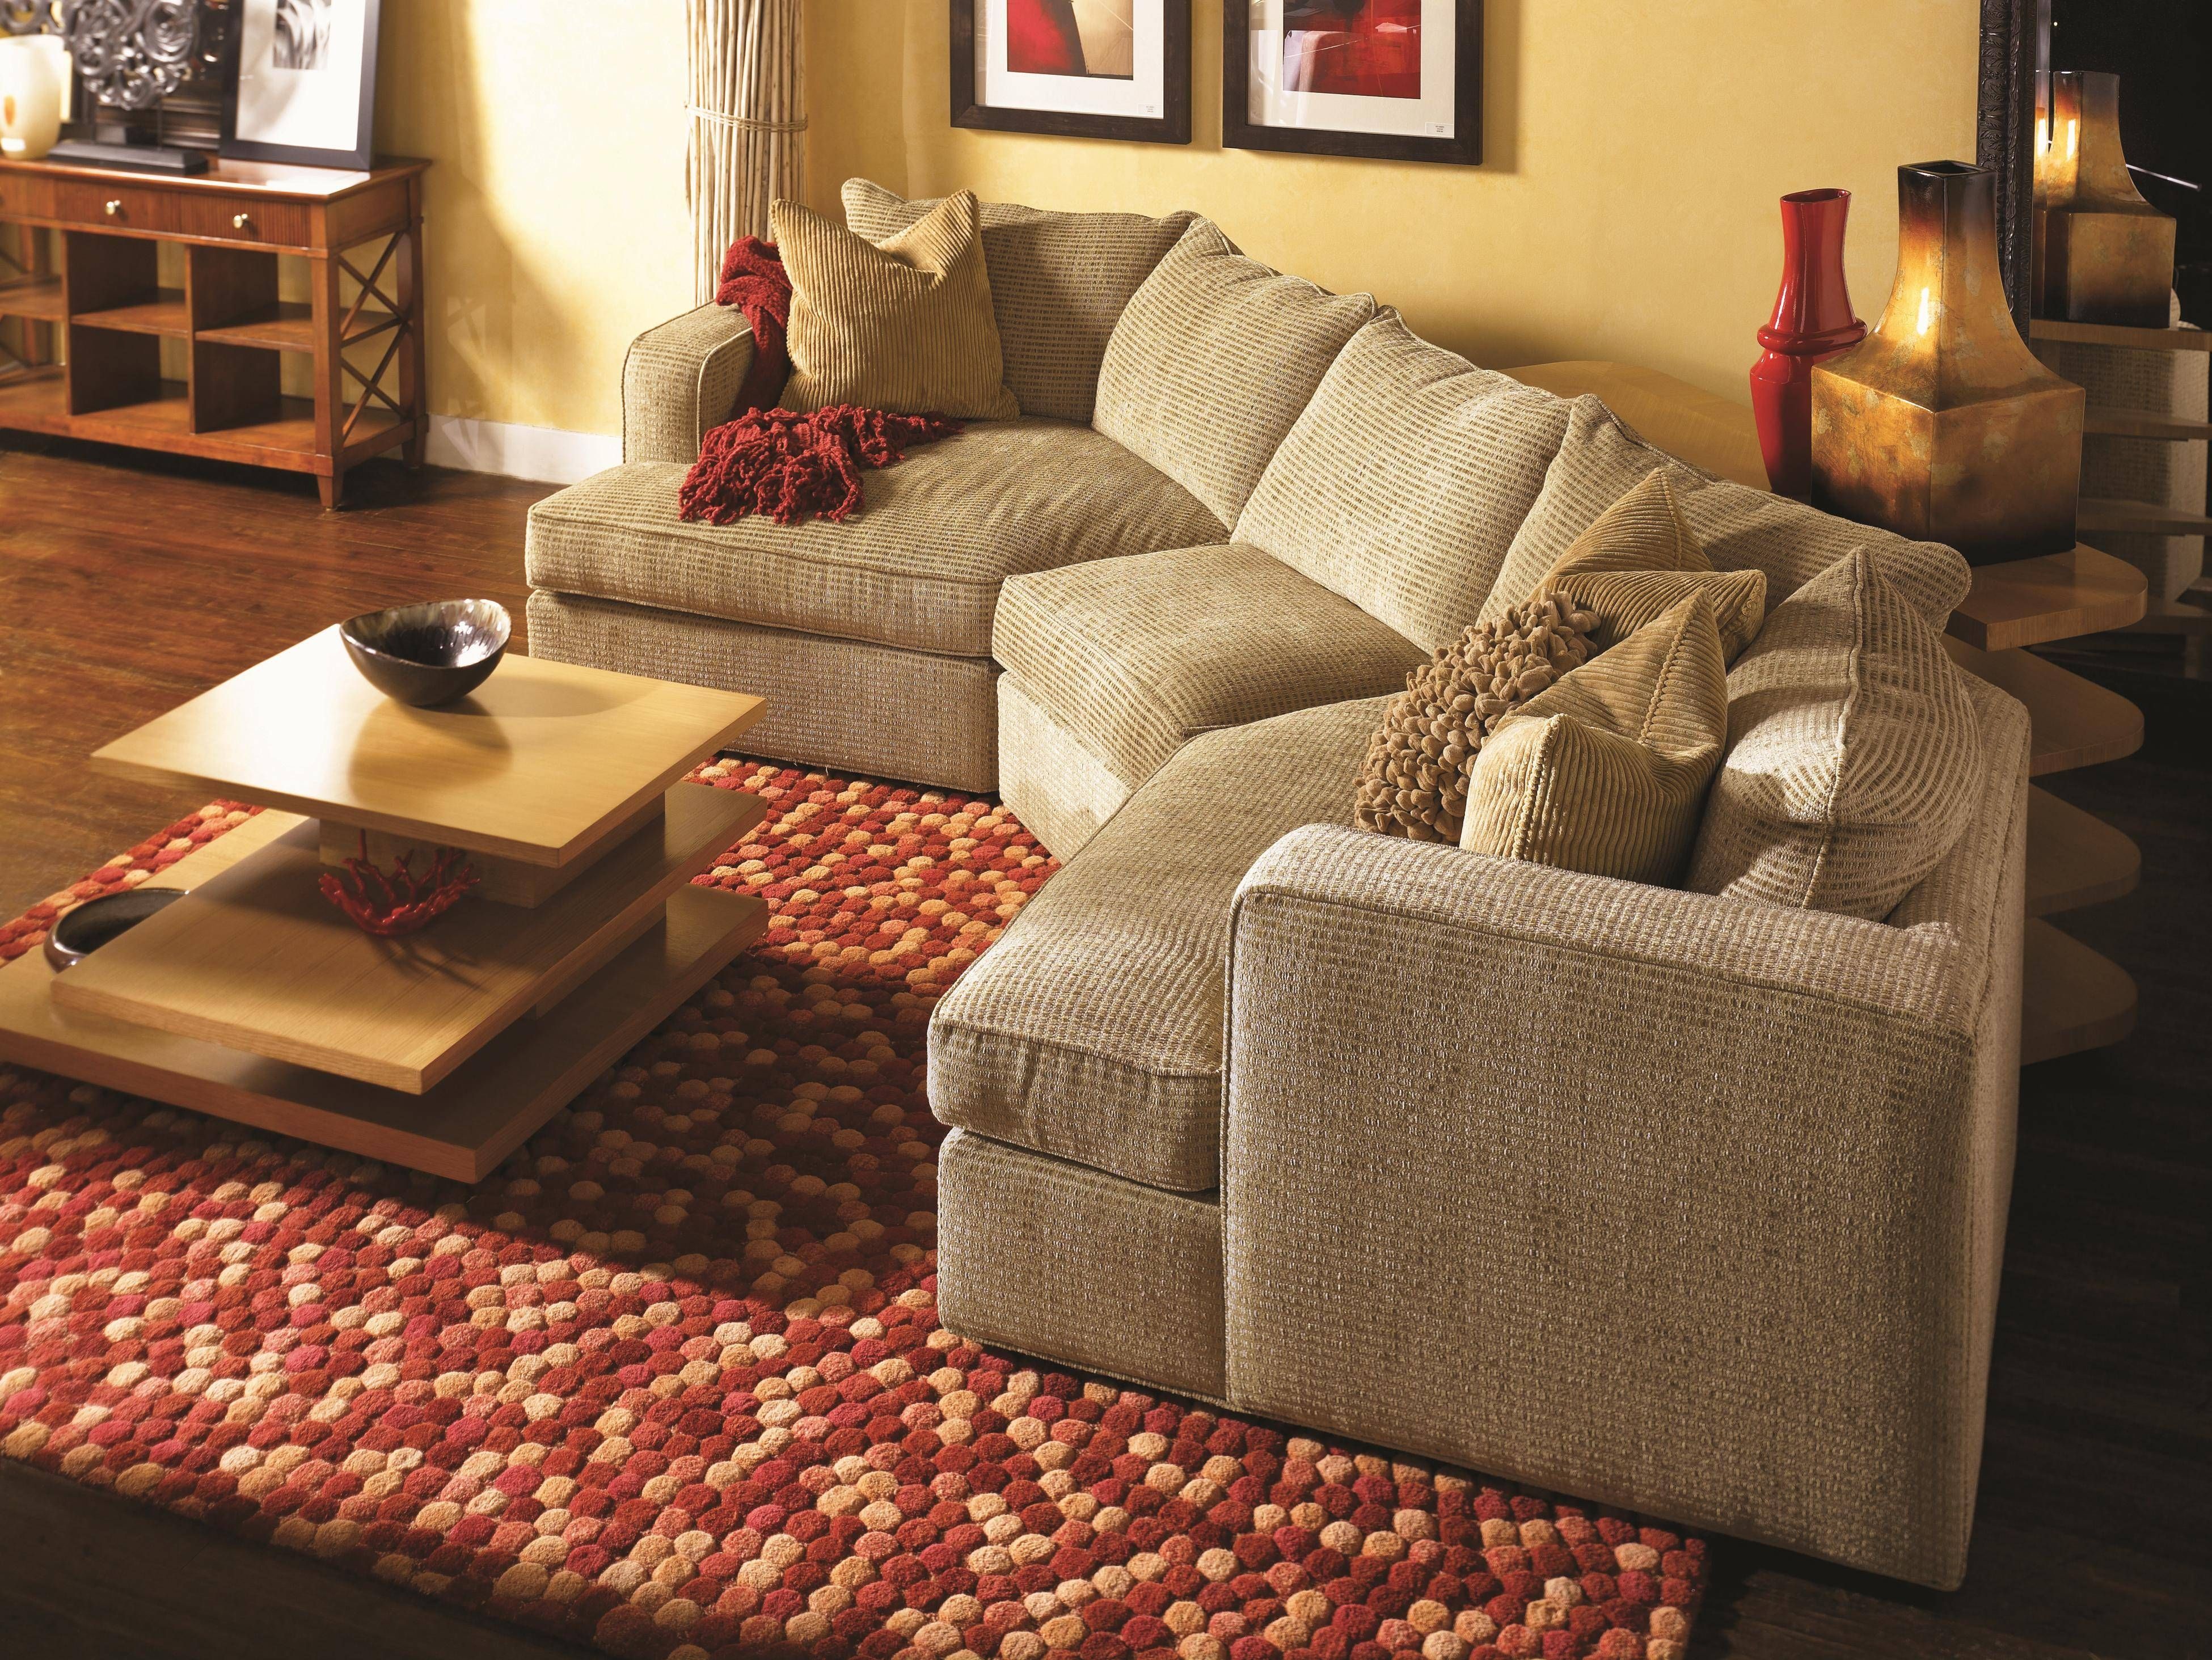 Norwalk Milford Sectional Sofa With 2 End Angle Chaises And Track Intended For Norwalk Sofa And Chairs (View 16 of 30)